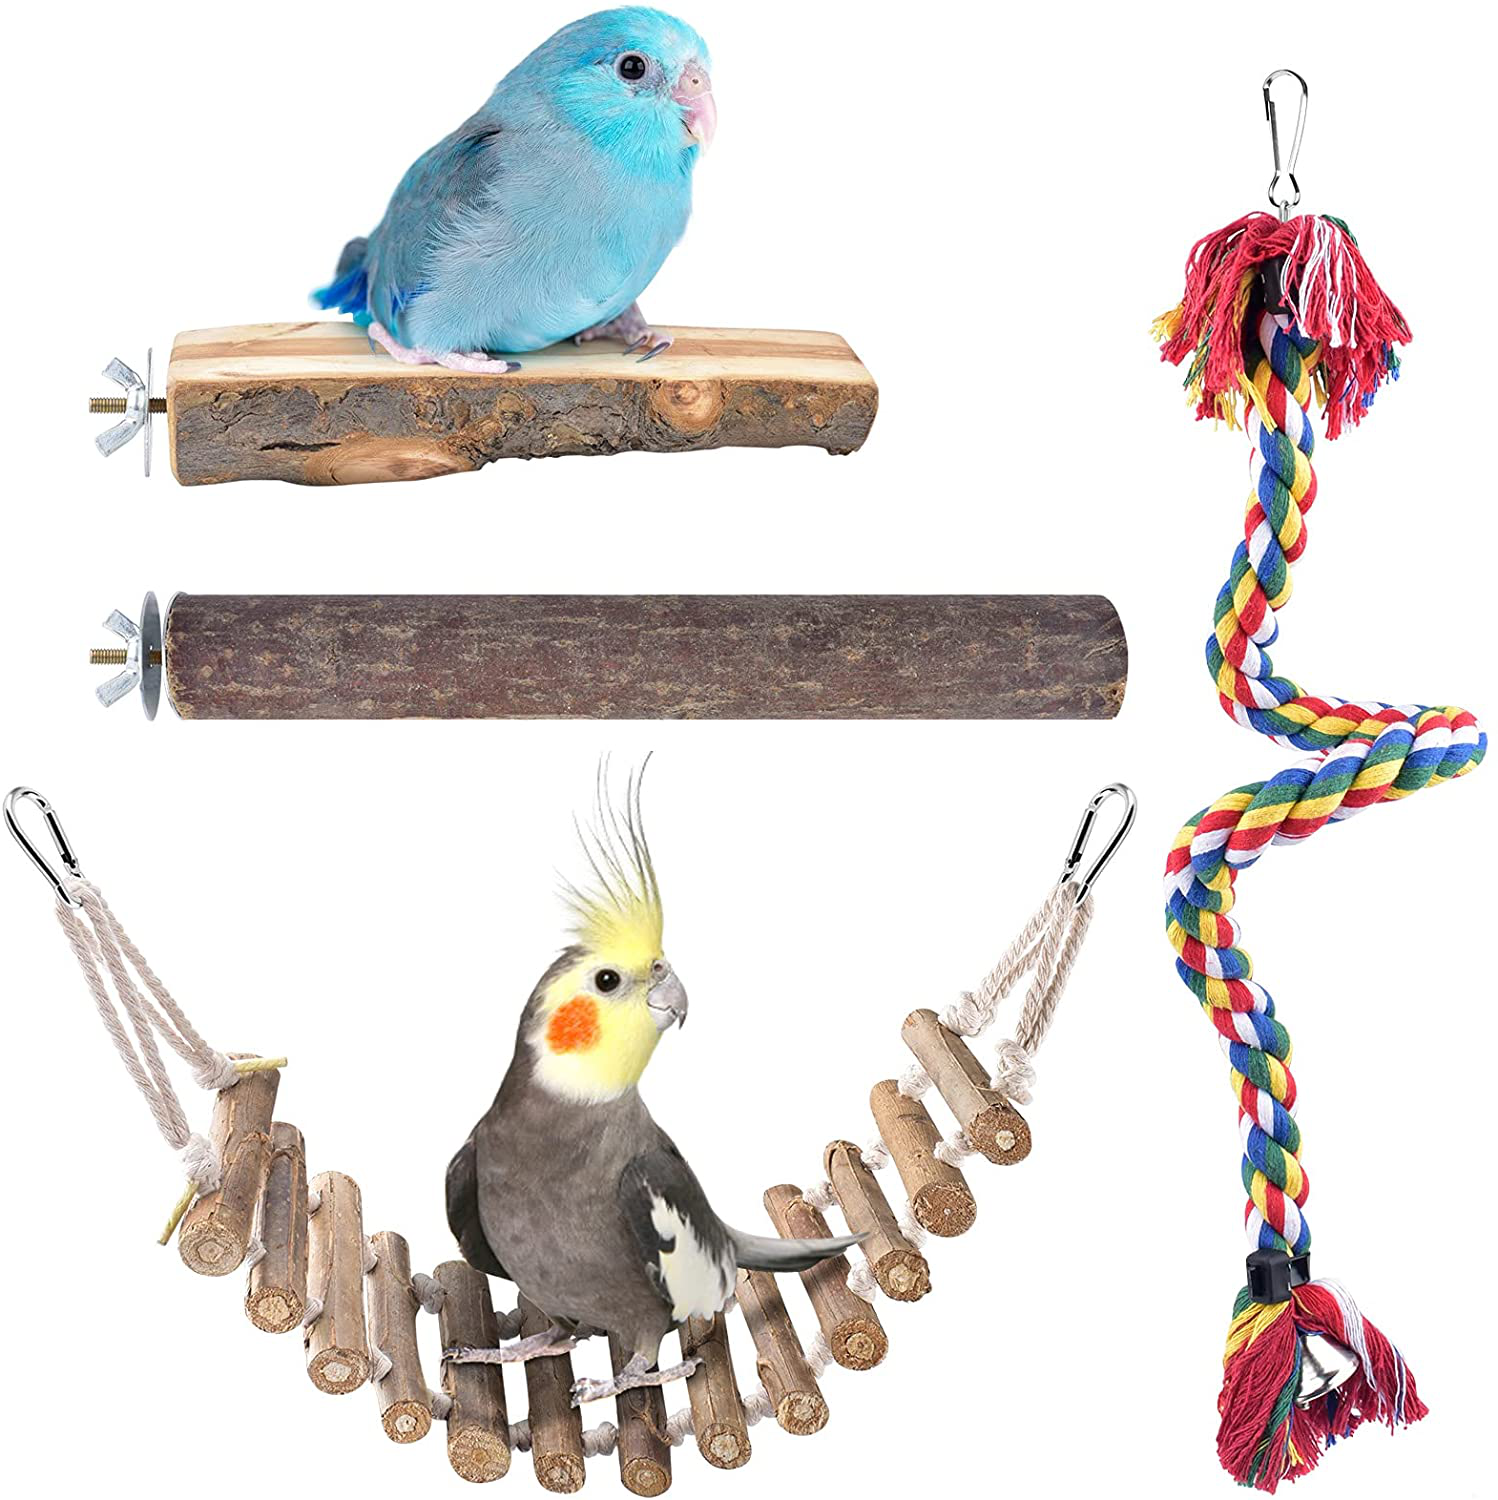 ERKOON Bird Perch Set, Birds Toy Natural Wood Perches Stand Platform Swing Ladder Rope Bird Cage Accessories for Parrot Parakeets Cockatiels Conures Lovebirds Finches (4Pack)